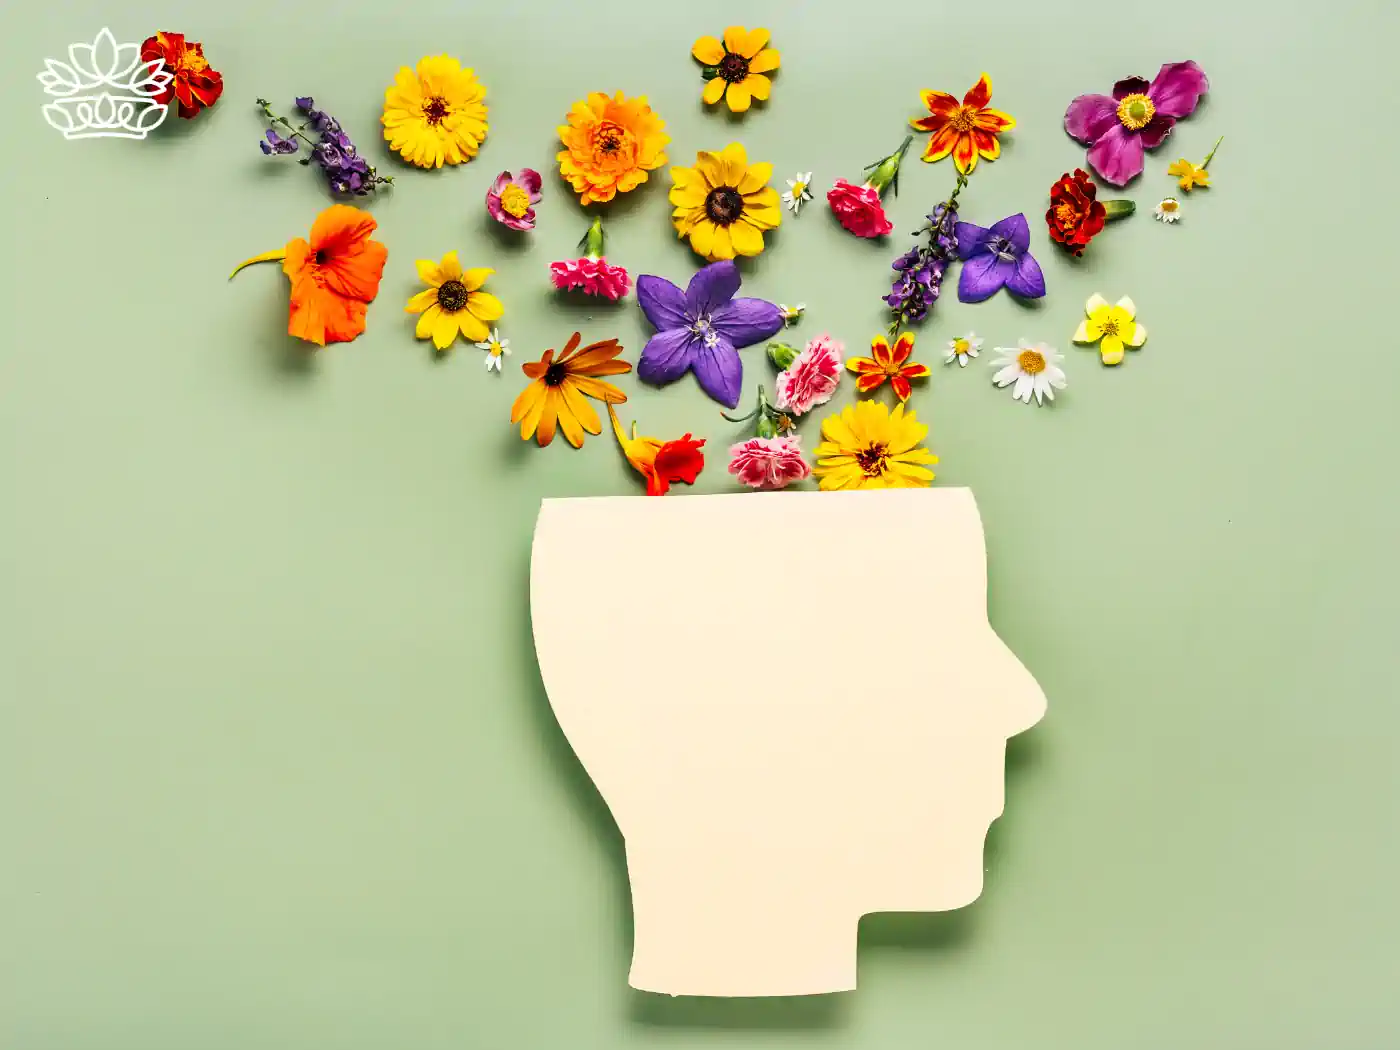 Creative representation of a human head silhouette surrounded by a vibrant array of colorful flowers on a green background, symbolizing mental well-being and harmony included in mental health gift boxes from Fabulous Flowers and Gifts. Delivered with thoughtful attention and care.